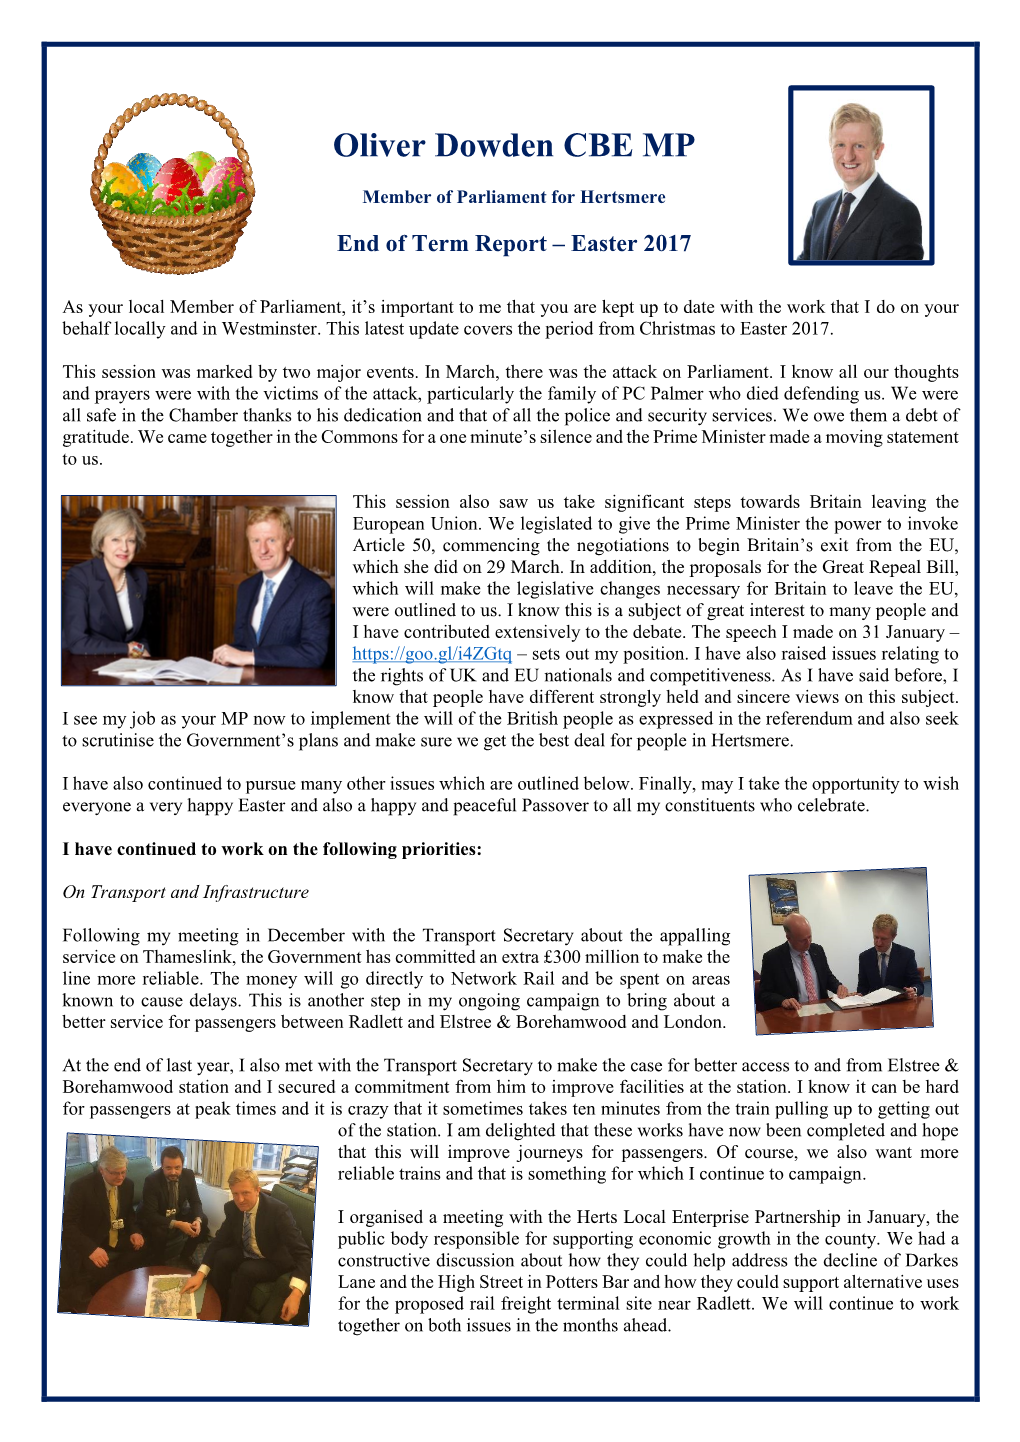 End of Term Report – Easter 2017